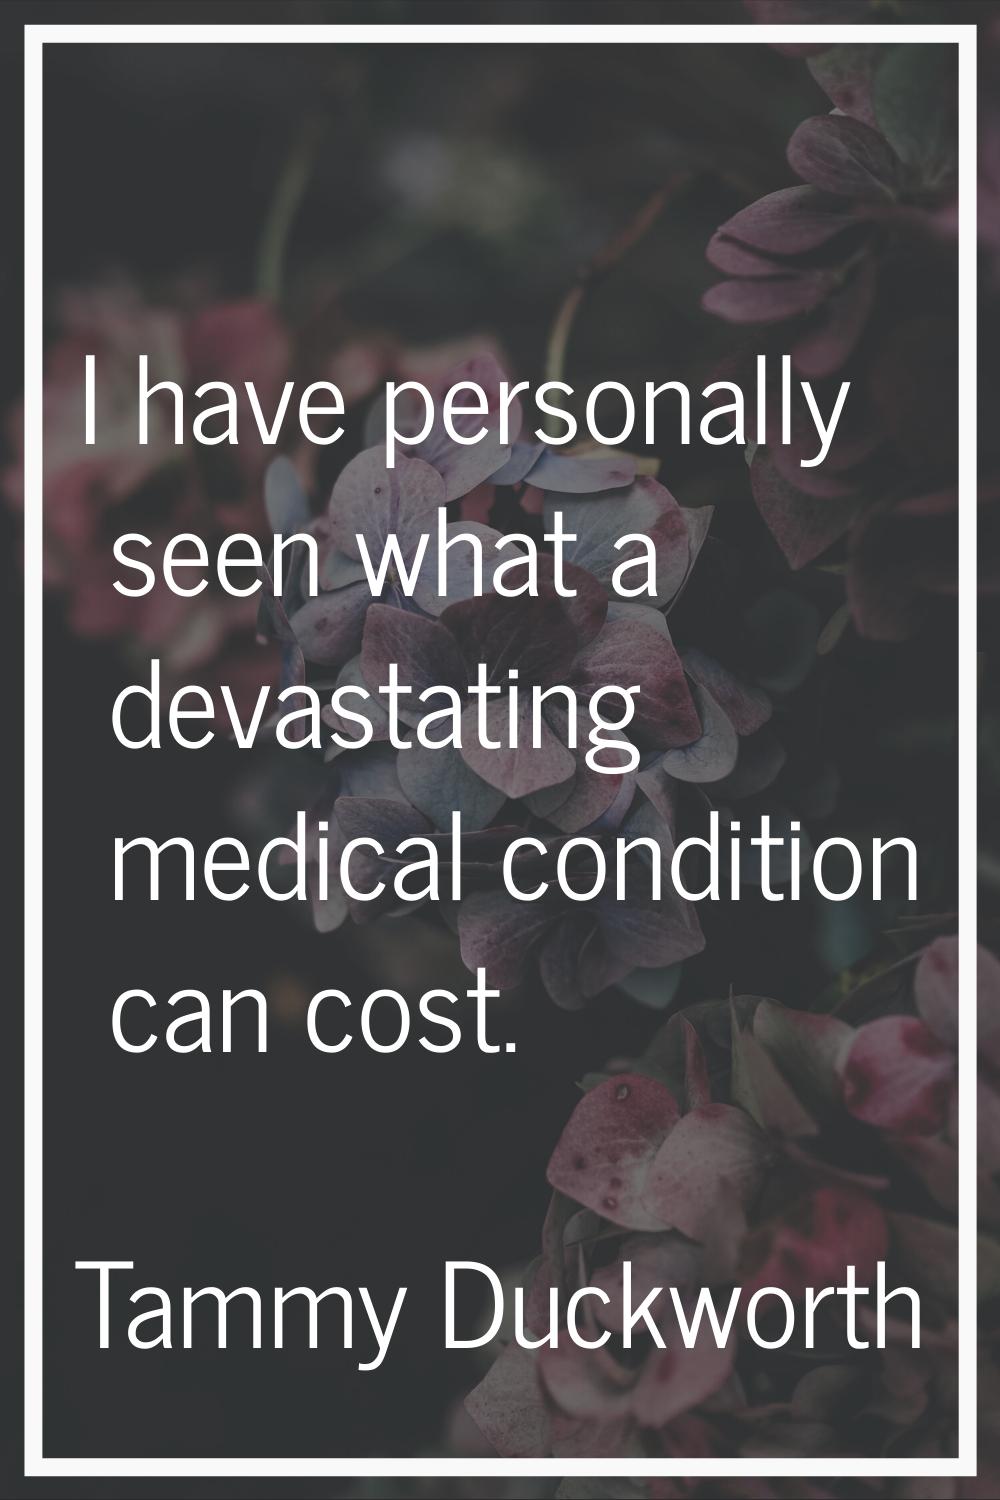 I have personally seen what a devastating medical condition can cost.